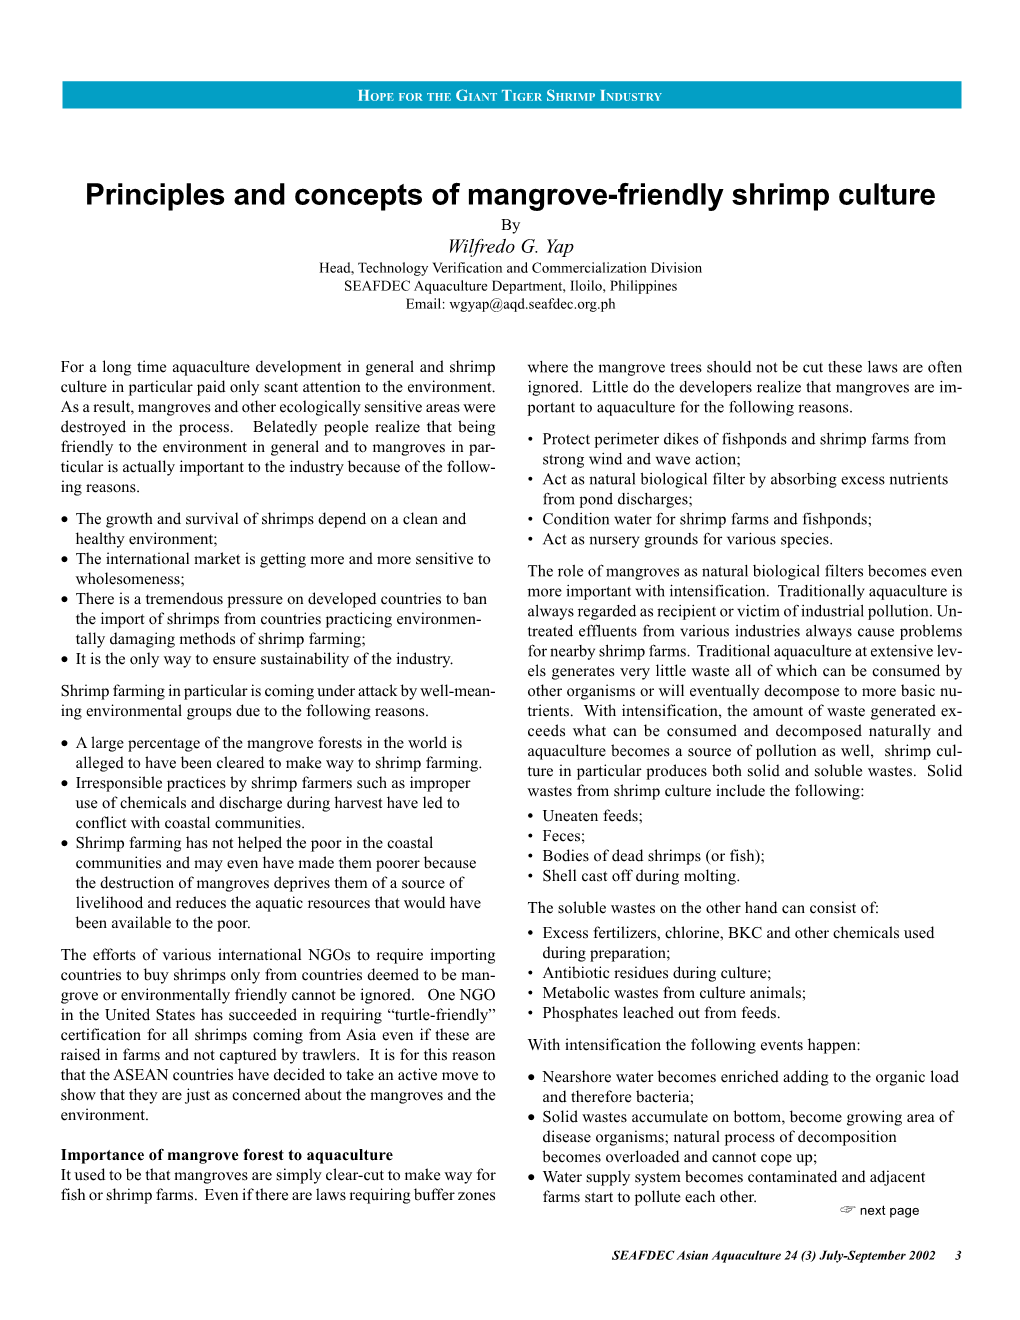 Principles and Concepts of Mangrove-Friendly Shrimp Culture by Wilfredo G